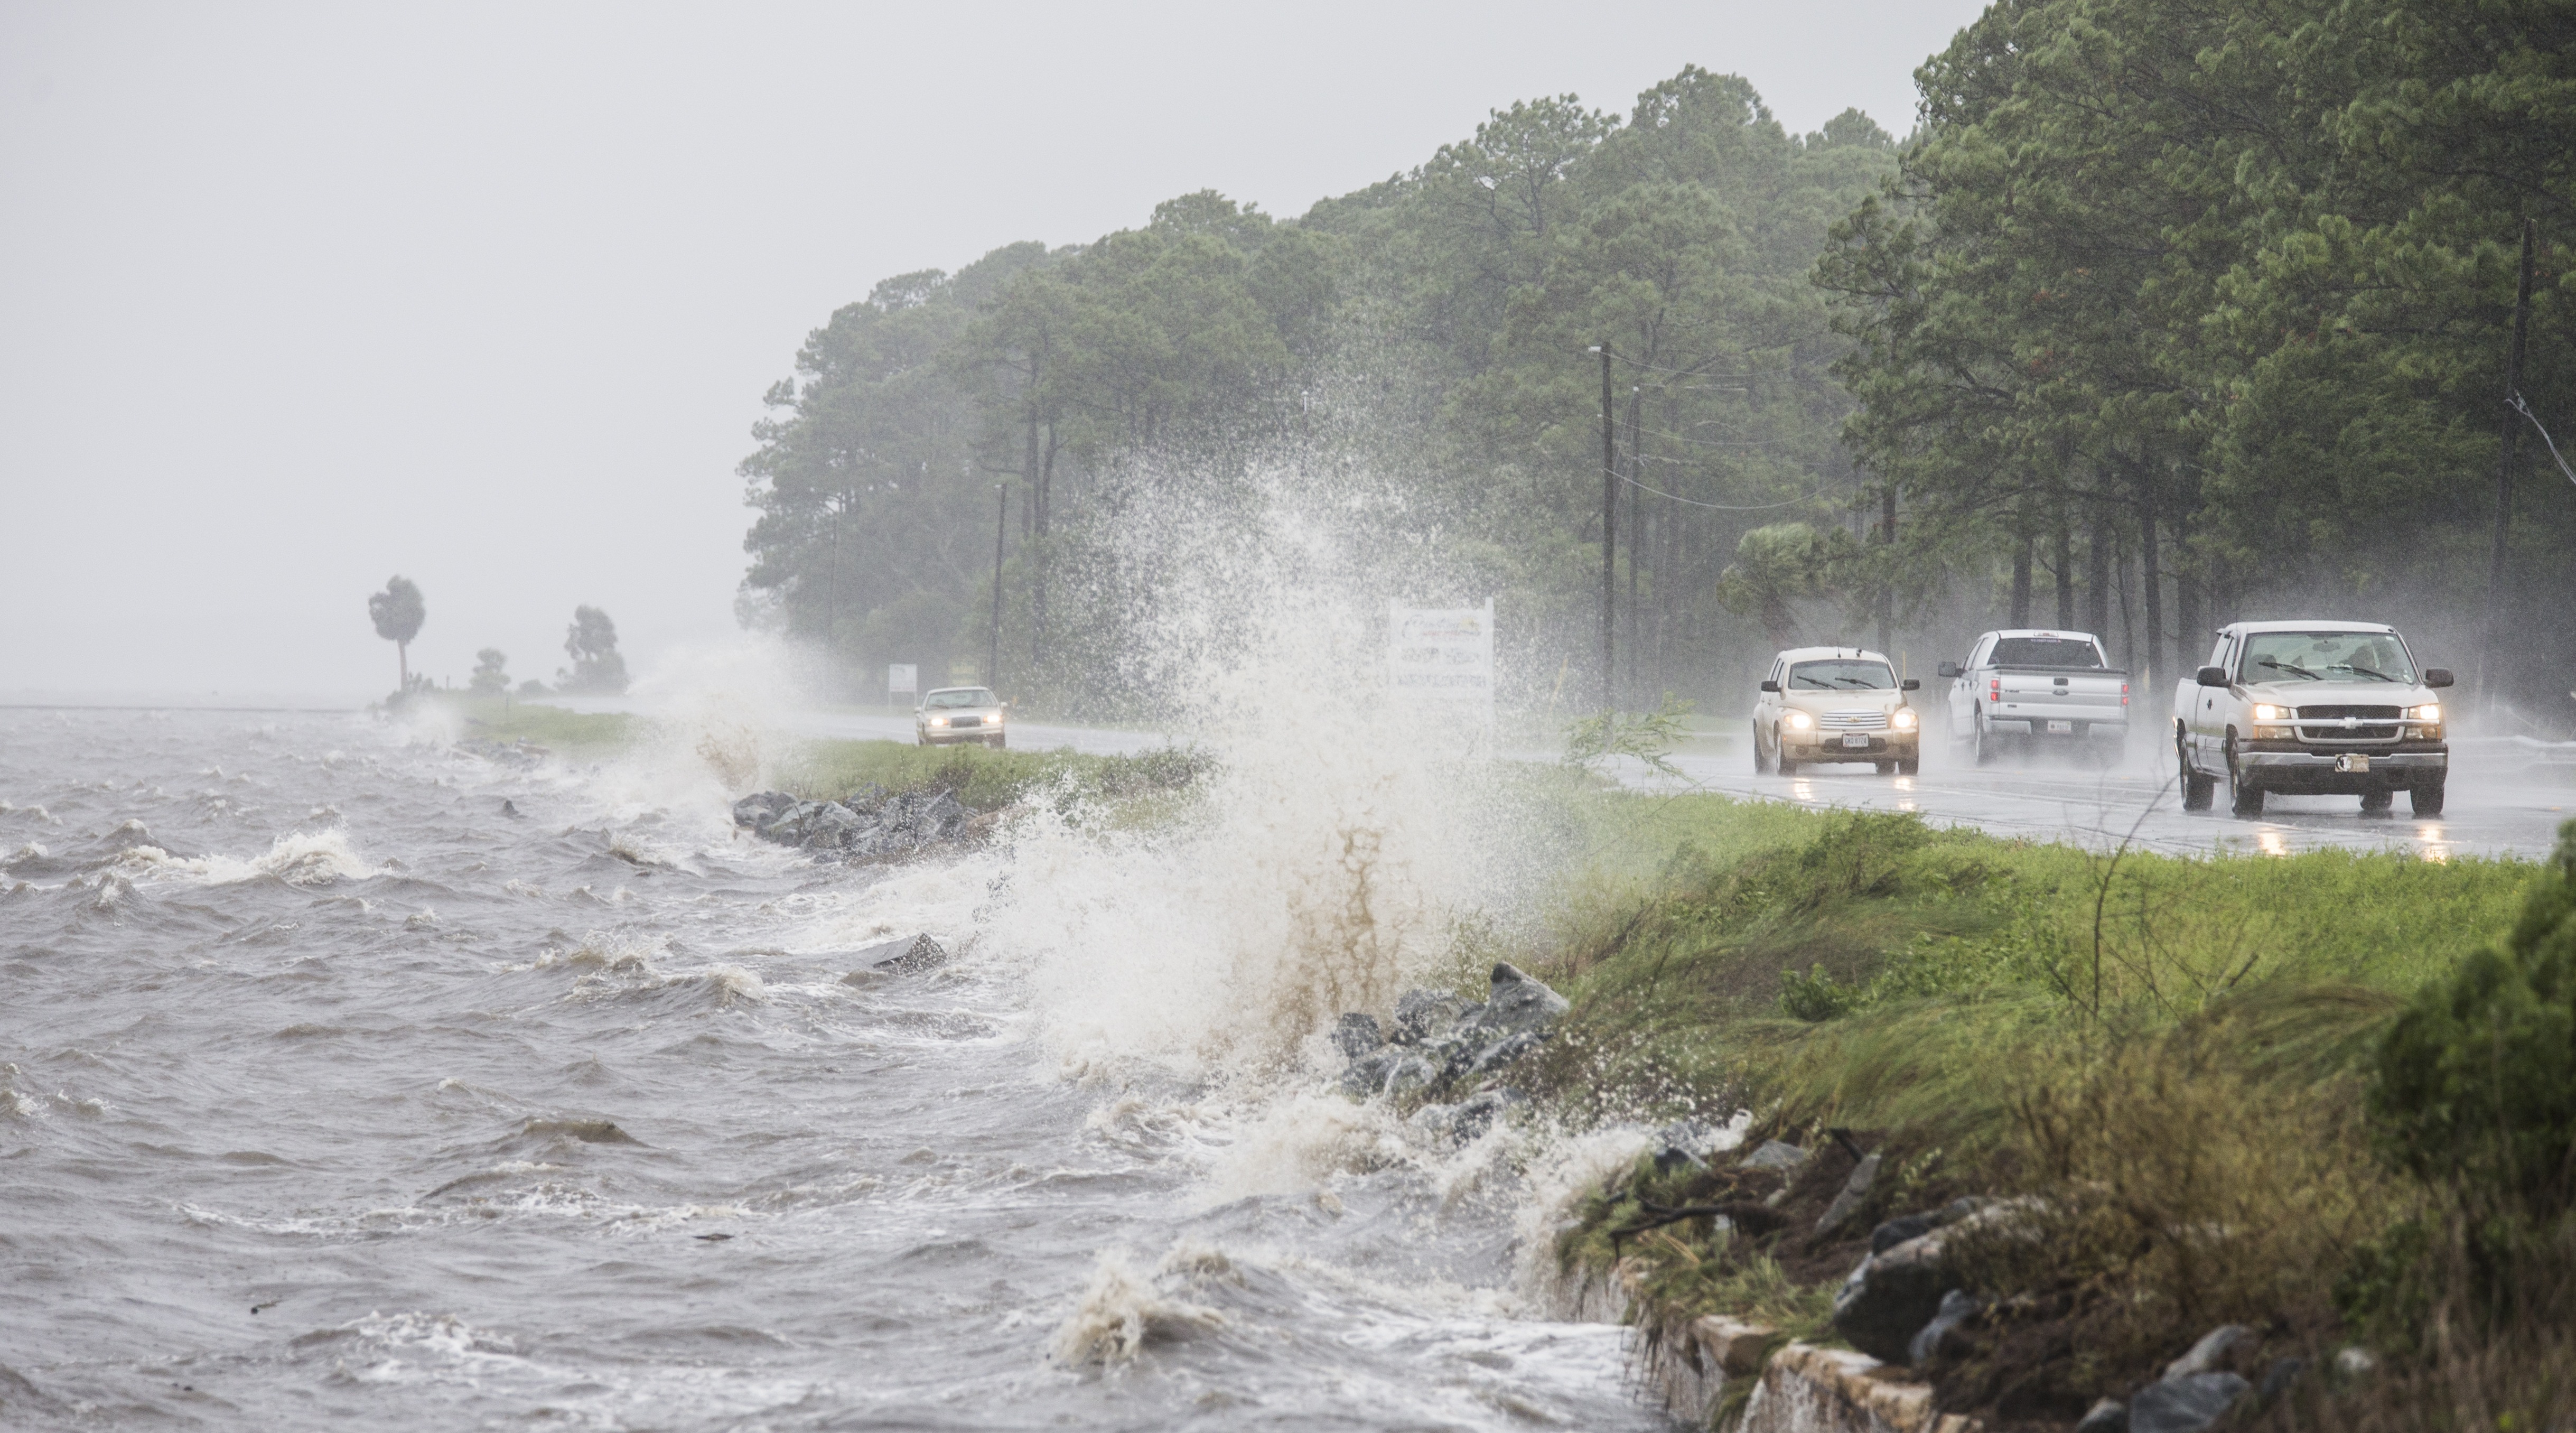 EASTPOINT, FL - SEPTEMBER 01: Traffic drives along US 98 as Hurricane Hermine approaches on September 1, 2016 in Eastpoint, Florida. Hurricane warnings have been issued for parts of Florida's Gulf Coast as Hermine is expected to make landfall as a Category 1 hurricane.